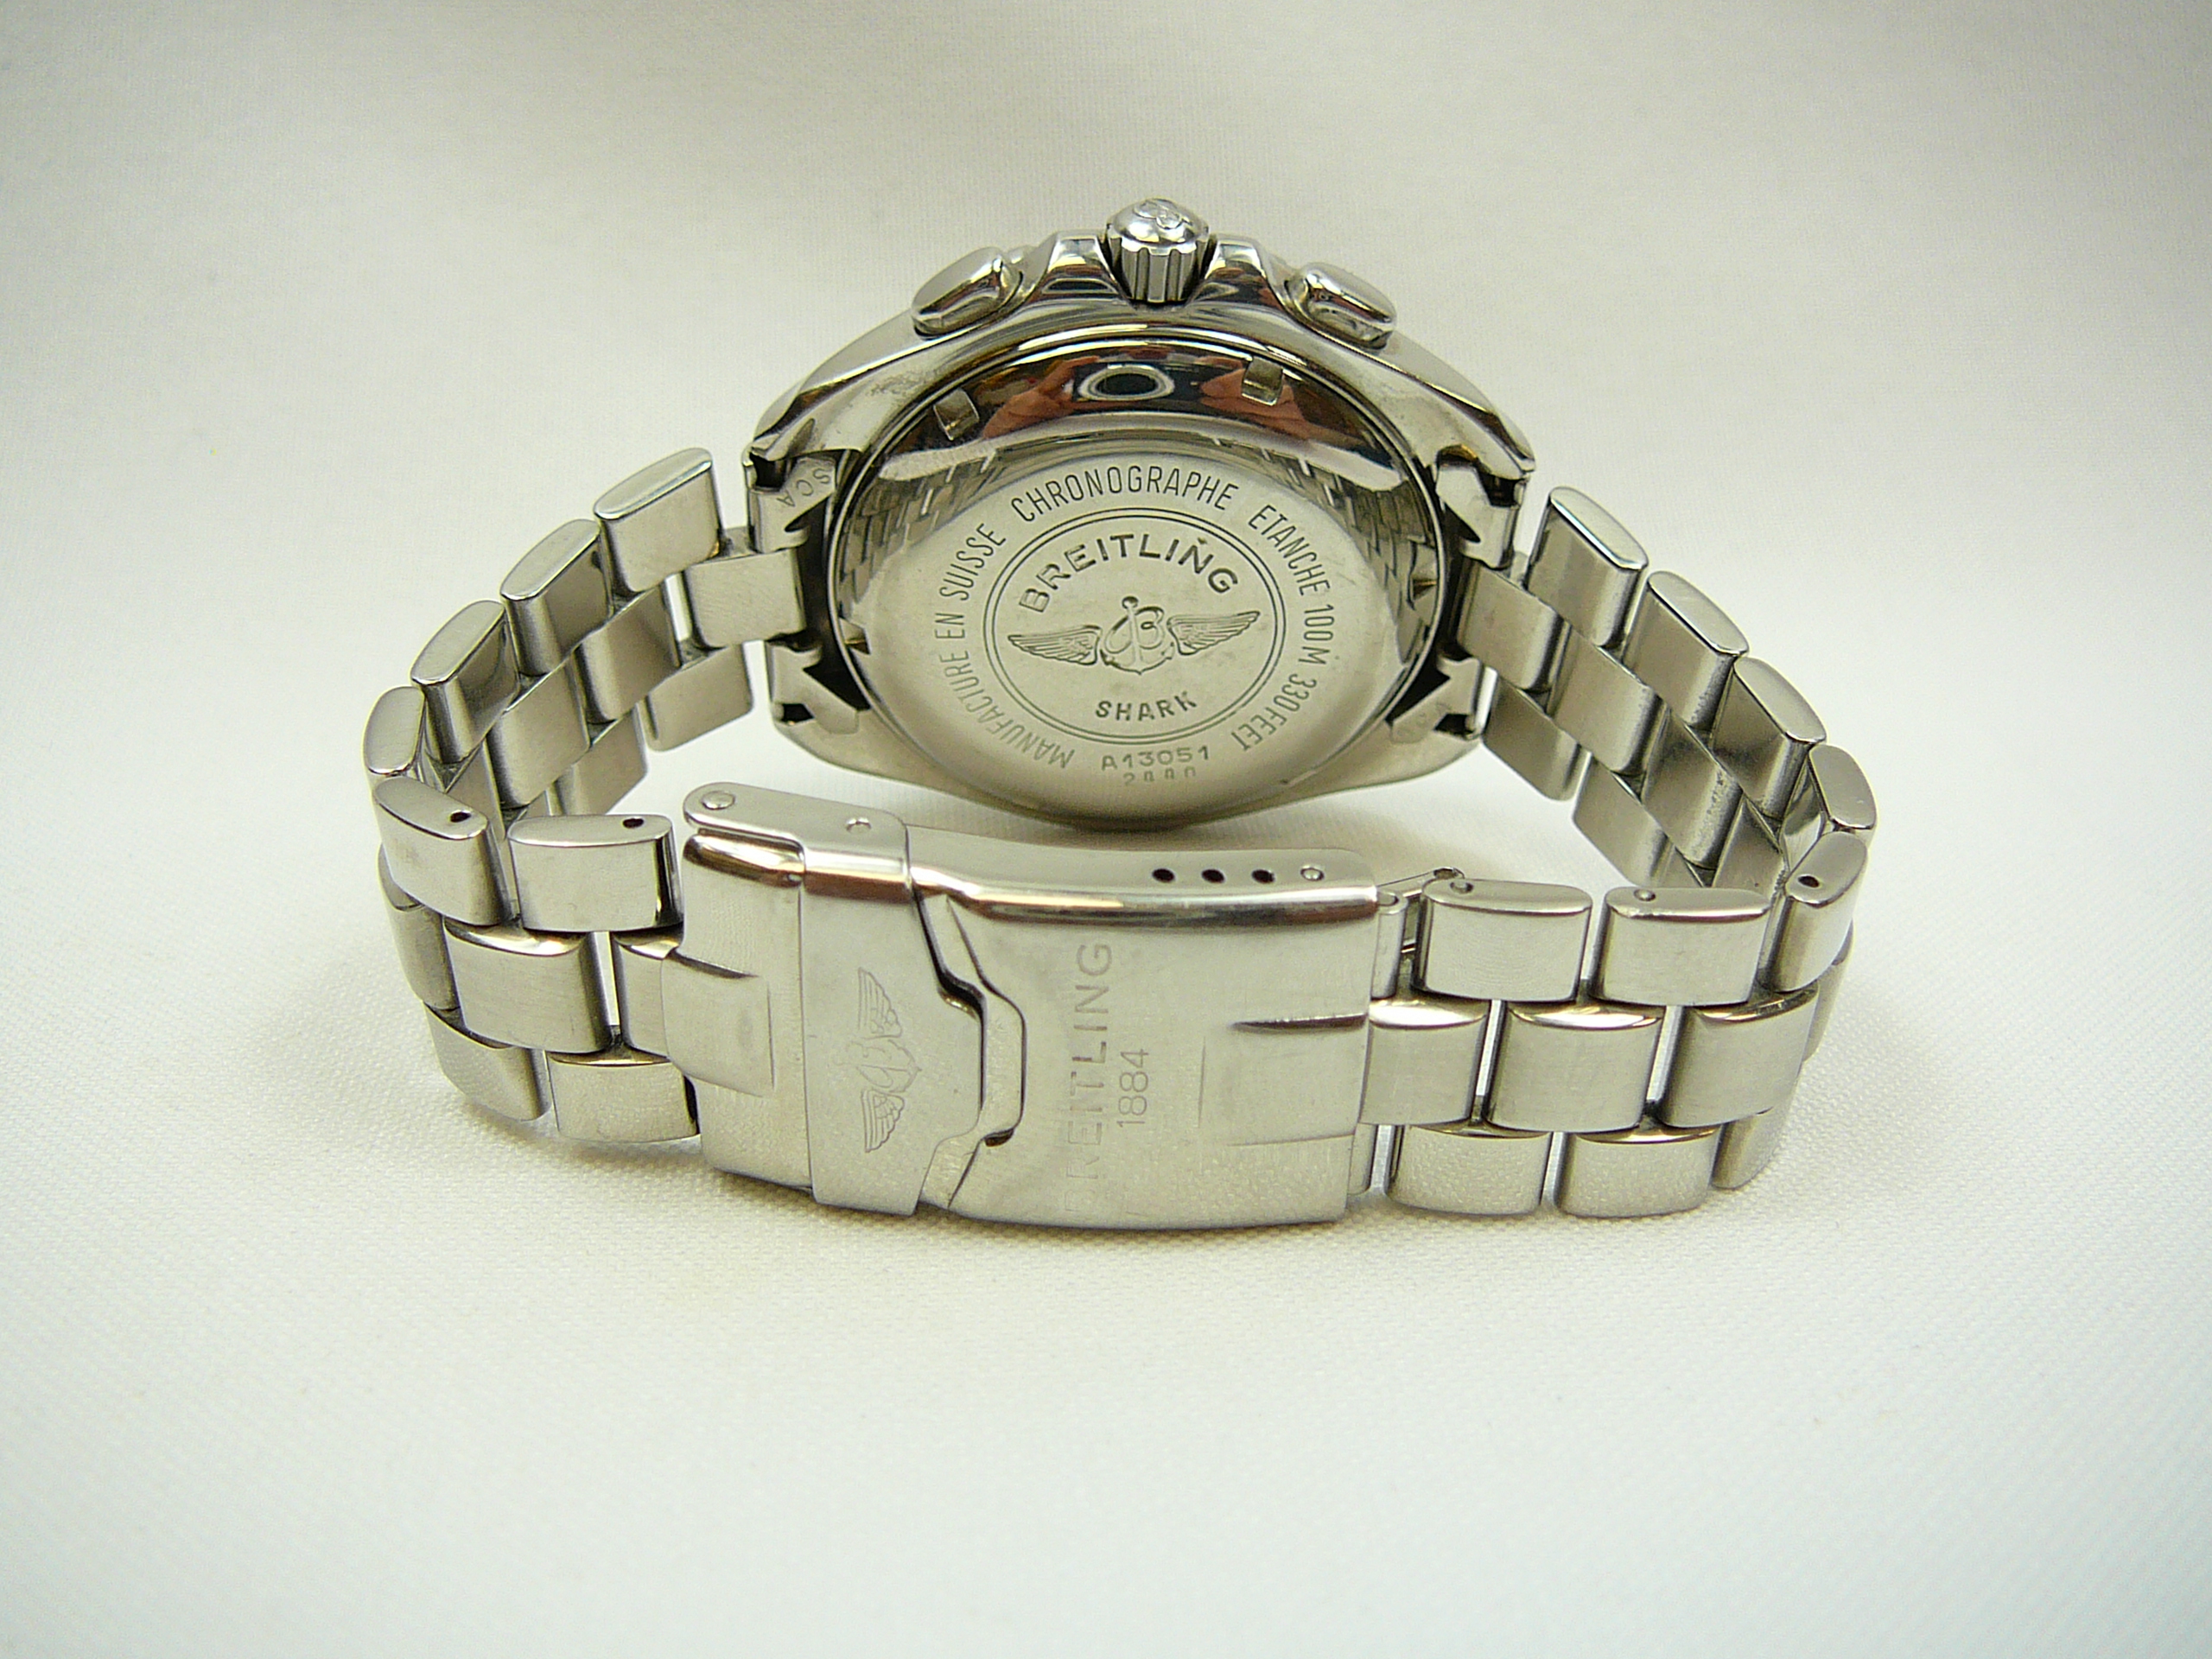 Gents Breitling Wristwatch - Image 4 of 4